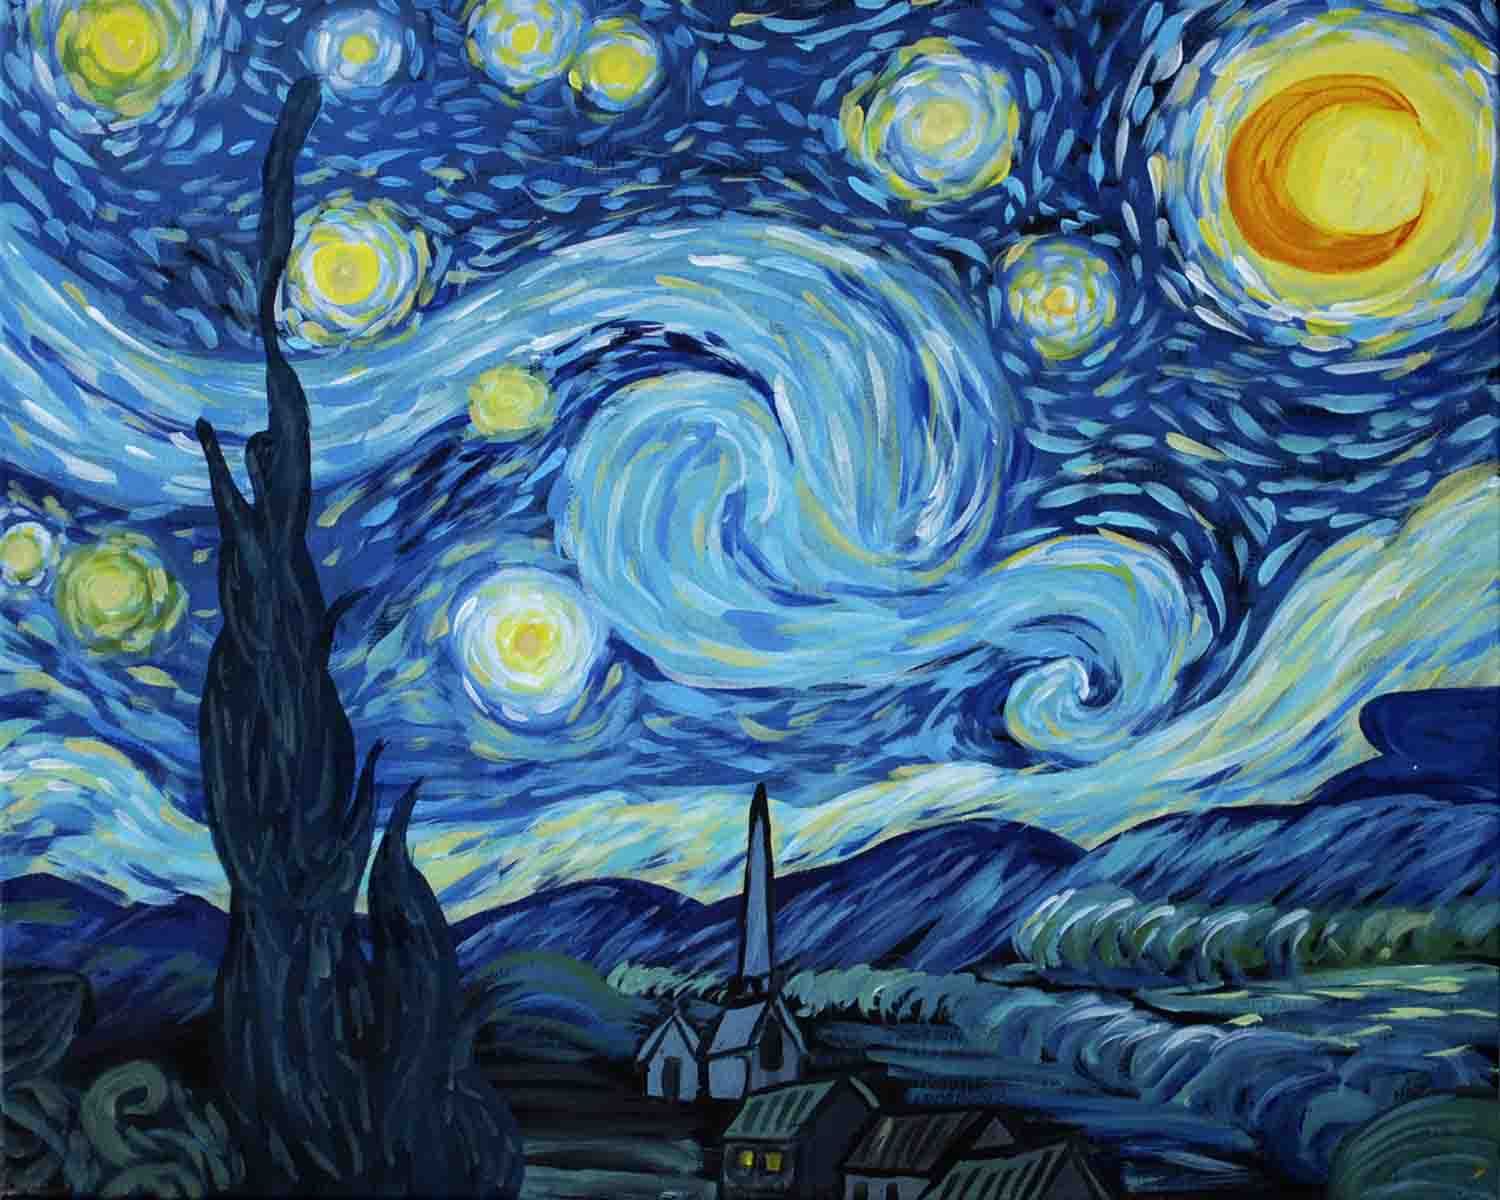 Do You Have the Smarts to Pass This General Knowledge Test? starry night